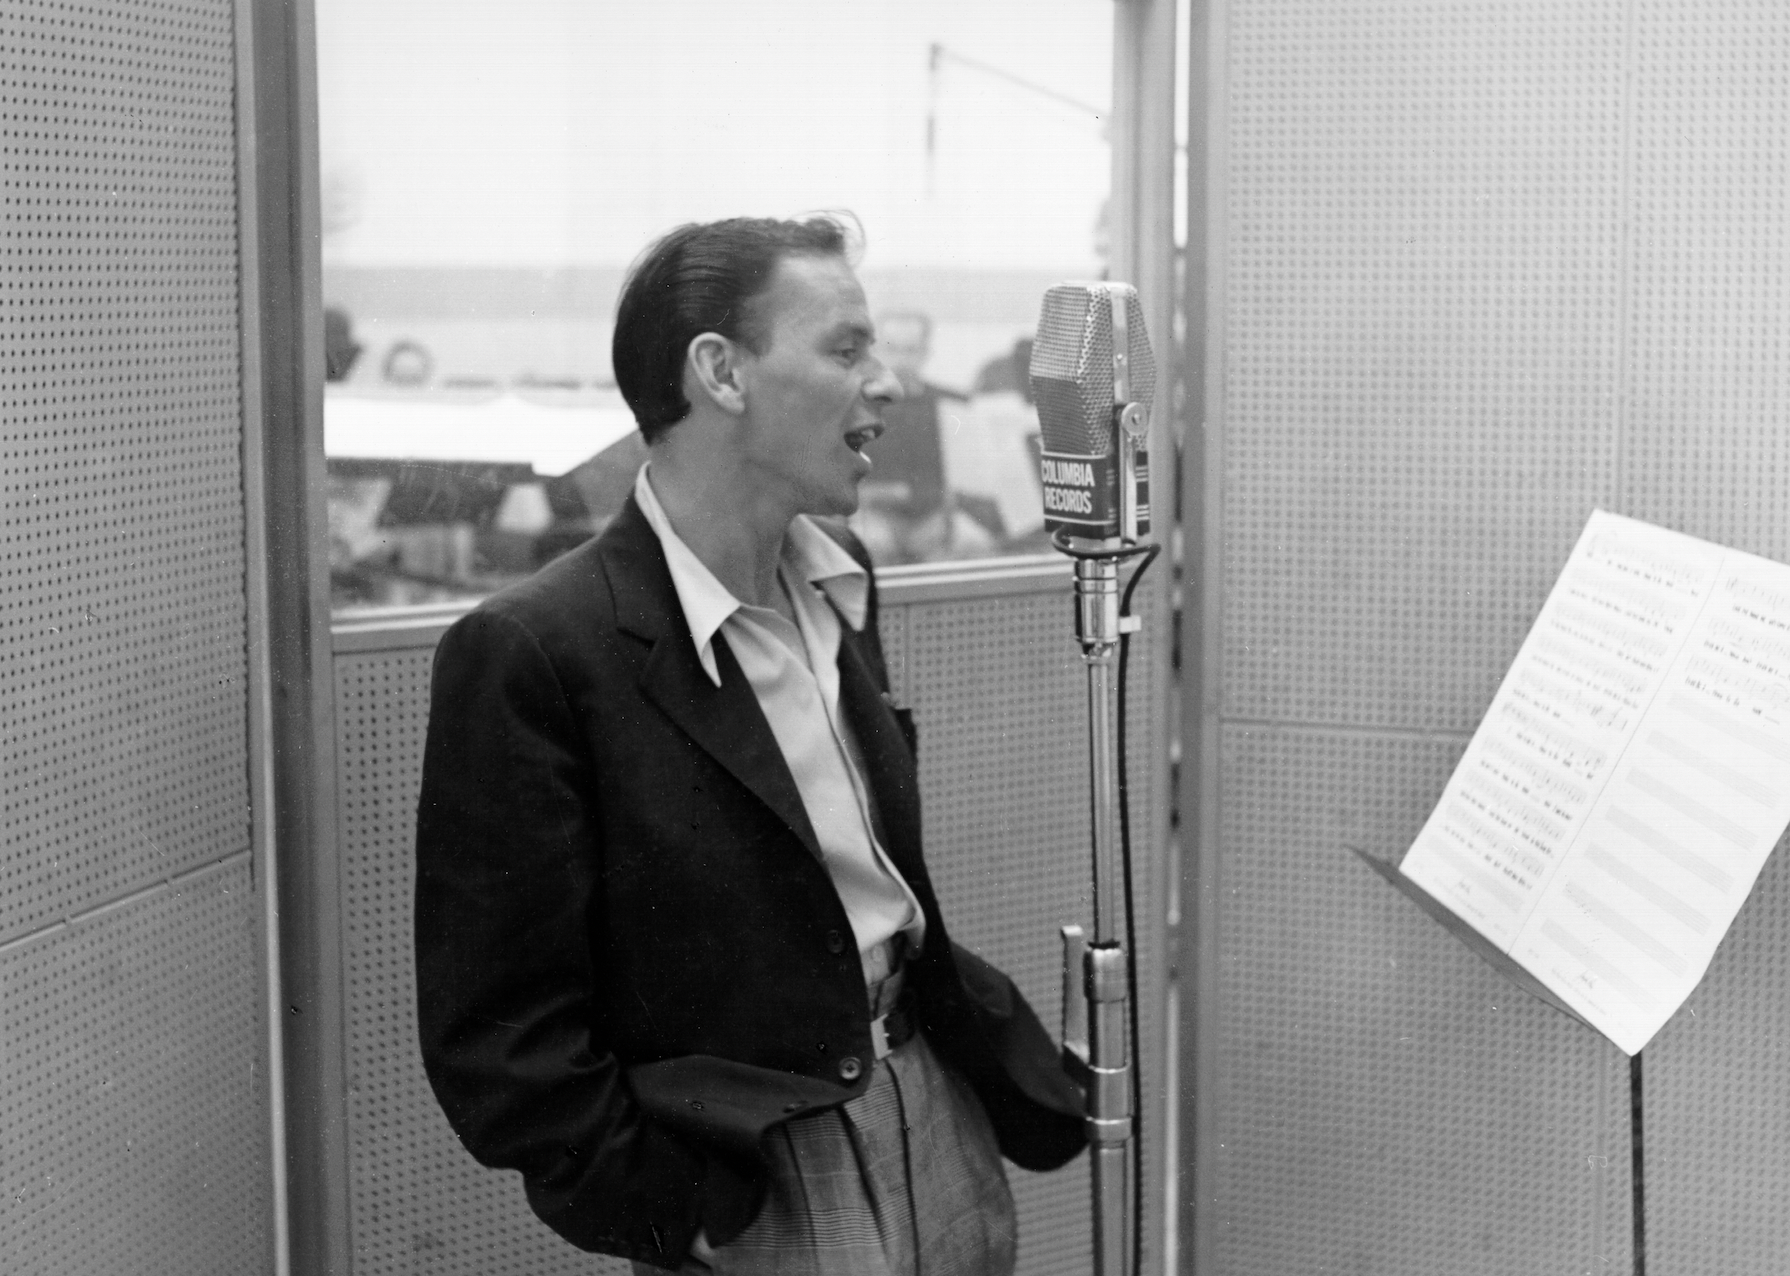 Frank Sinatra records in the studio at a Columbia Records microphone.